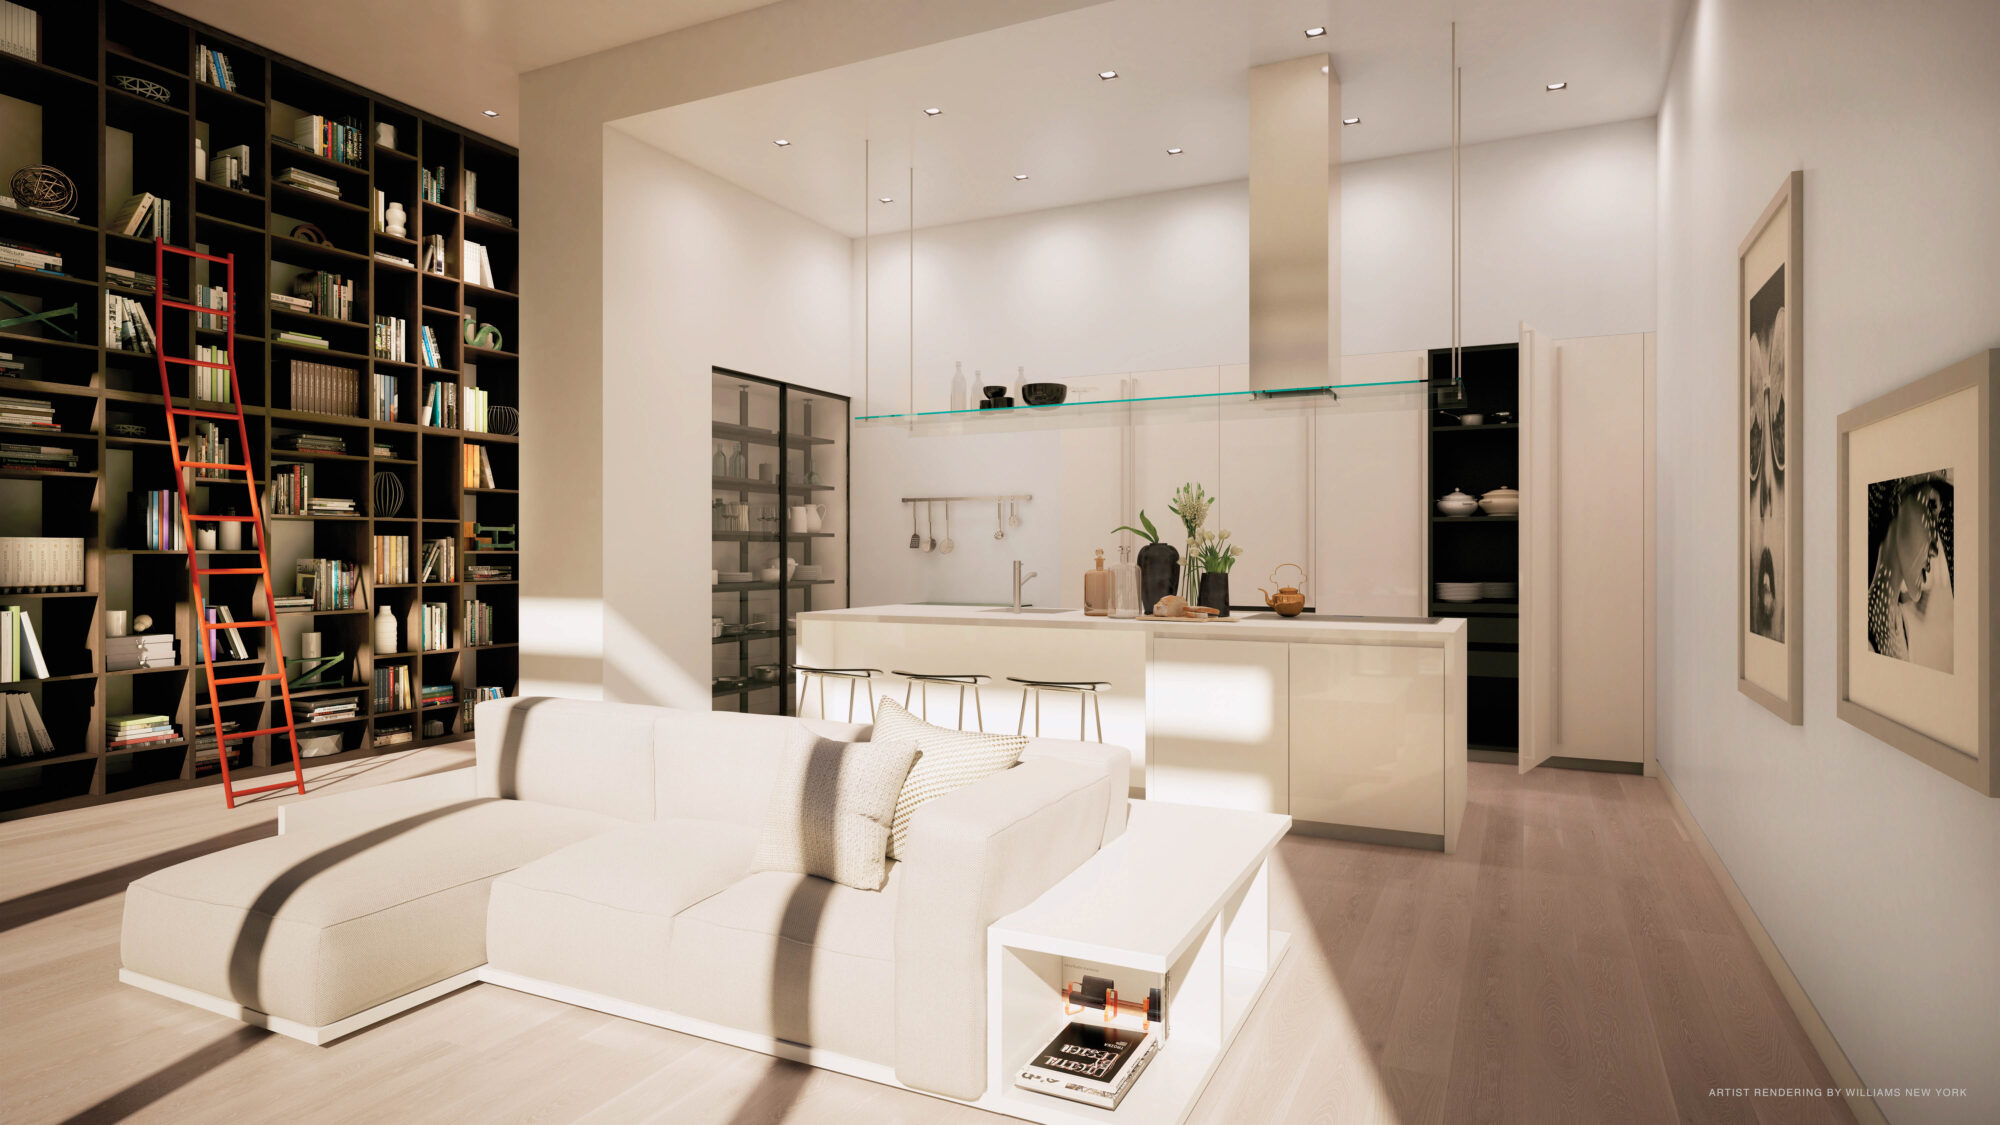 Manhattan luxury high rise living area with kitchen and bookshelf in the background